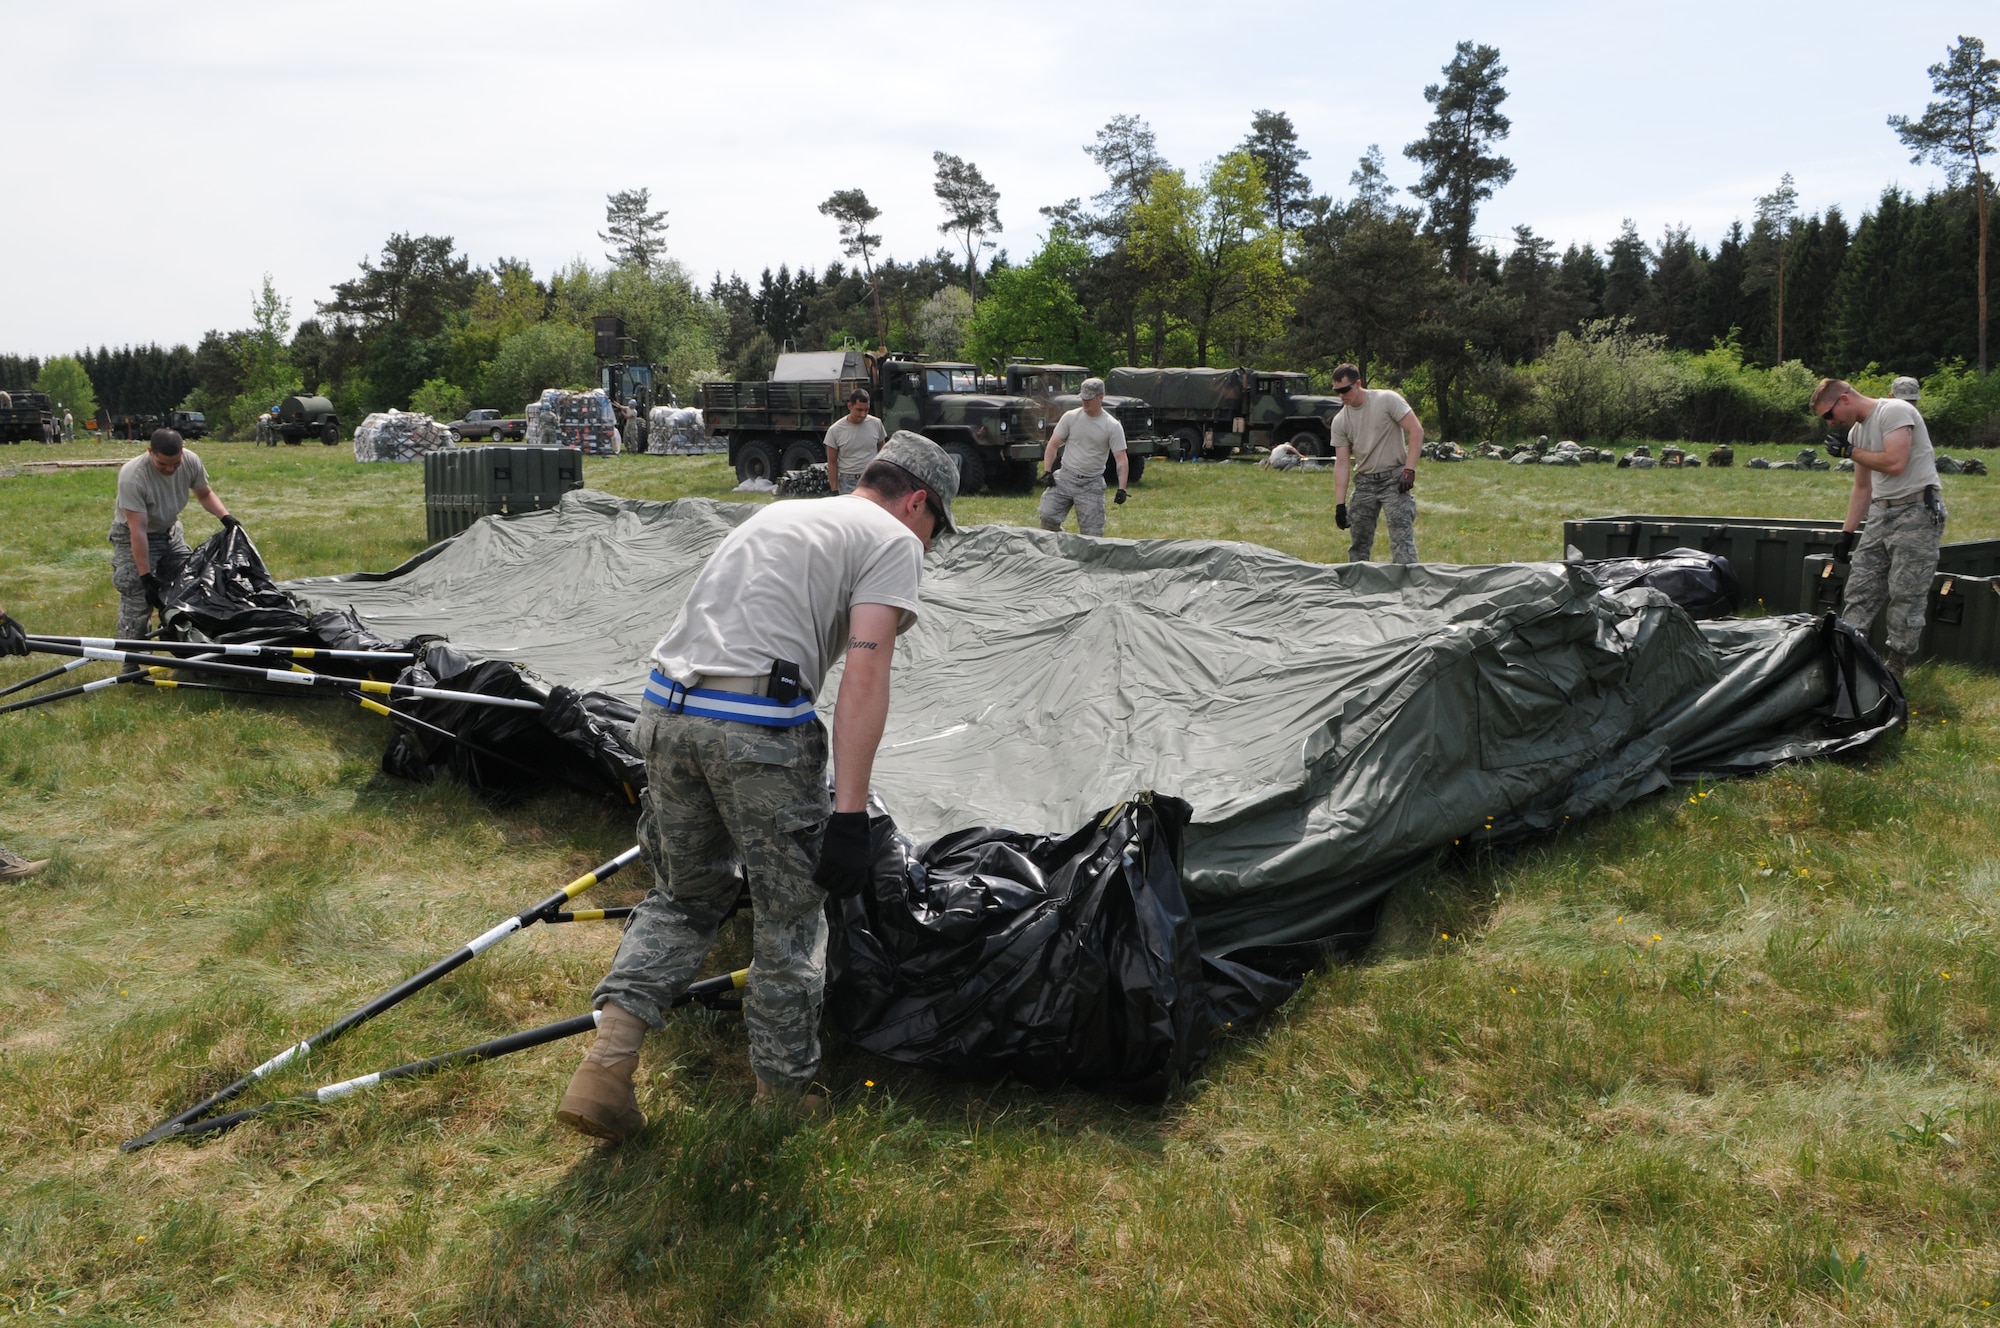 GEROLSTEIN, Germany – Airmen from the 606th Air Control Squadron move and build a tent after arriving to an isolated location as part of exercise Eifel Thunder 2011 in Gerolstein, Germany, May 9. The exercise tested the ability of Airmen to take all their equipment to an isolated location where they set up a deployed radar and satellite communications site as well as everything else required to survive and accomplish the mission in an isolated environment. (U.S. Air Force photo/Senior Airman Nick Wilson)